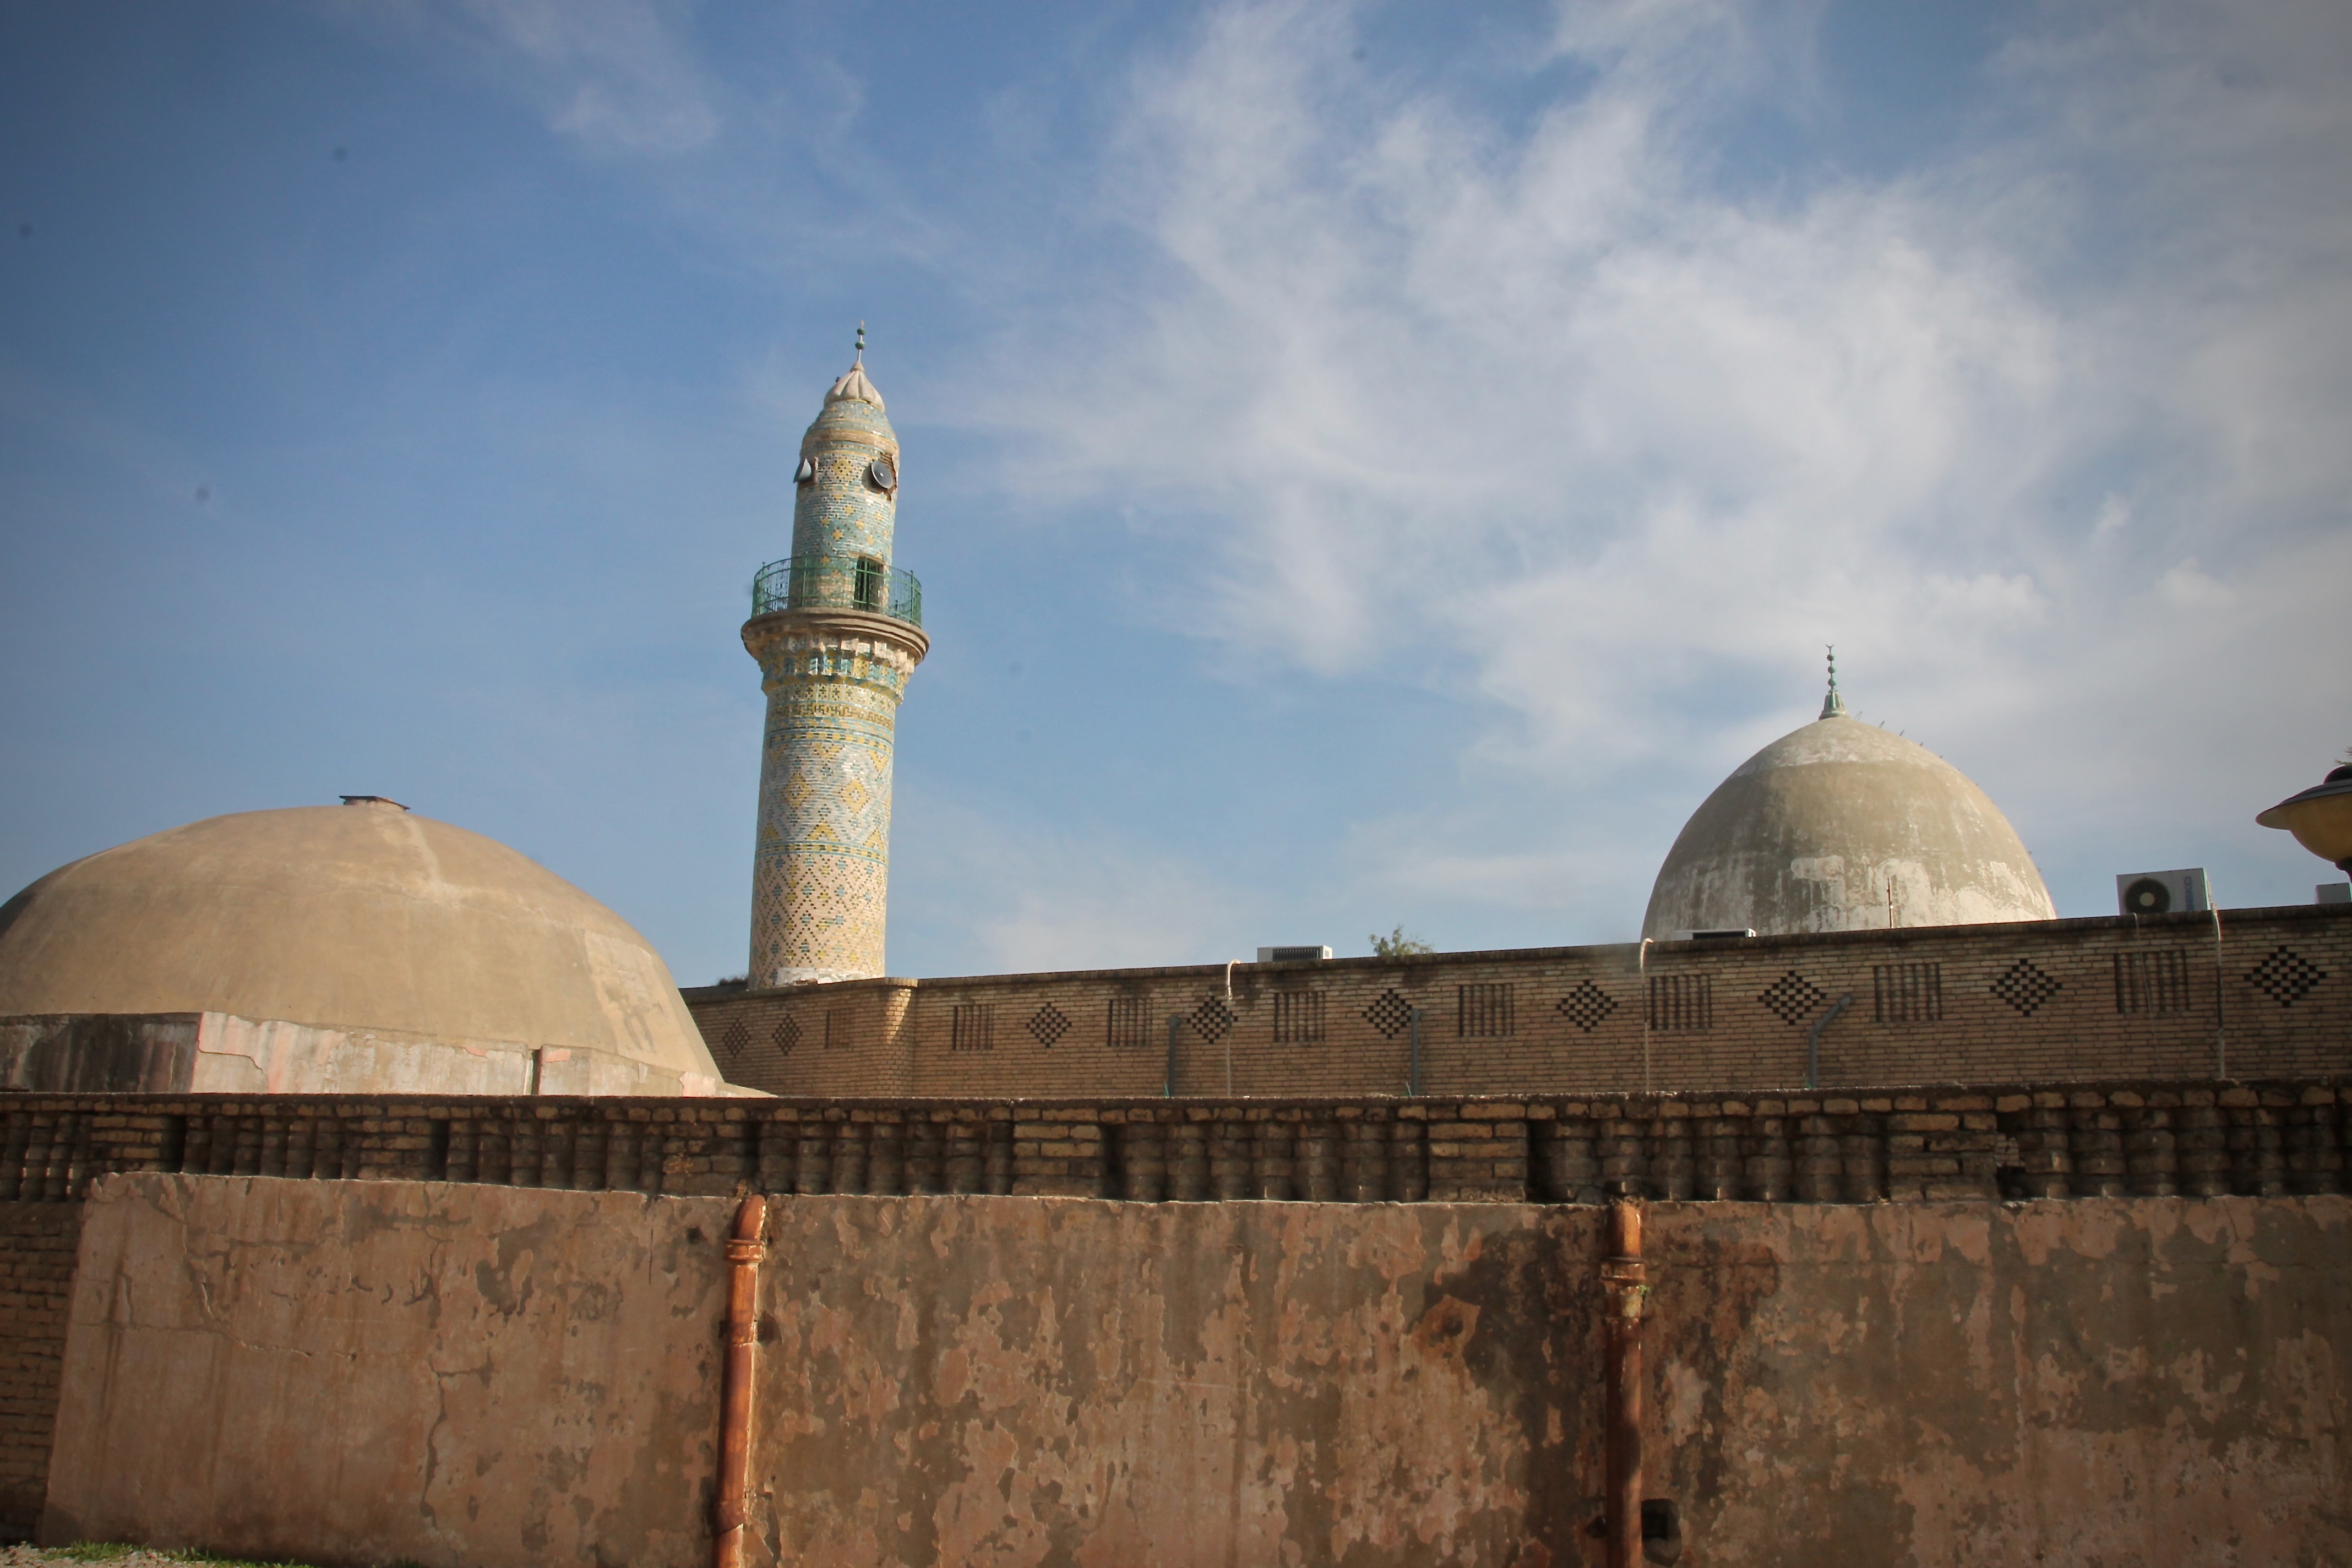 Mosque and hammam, photo by the author